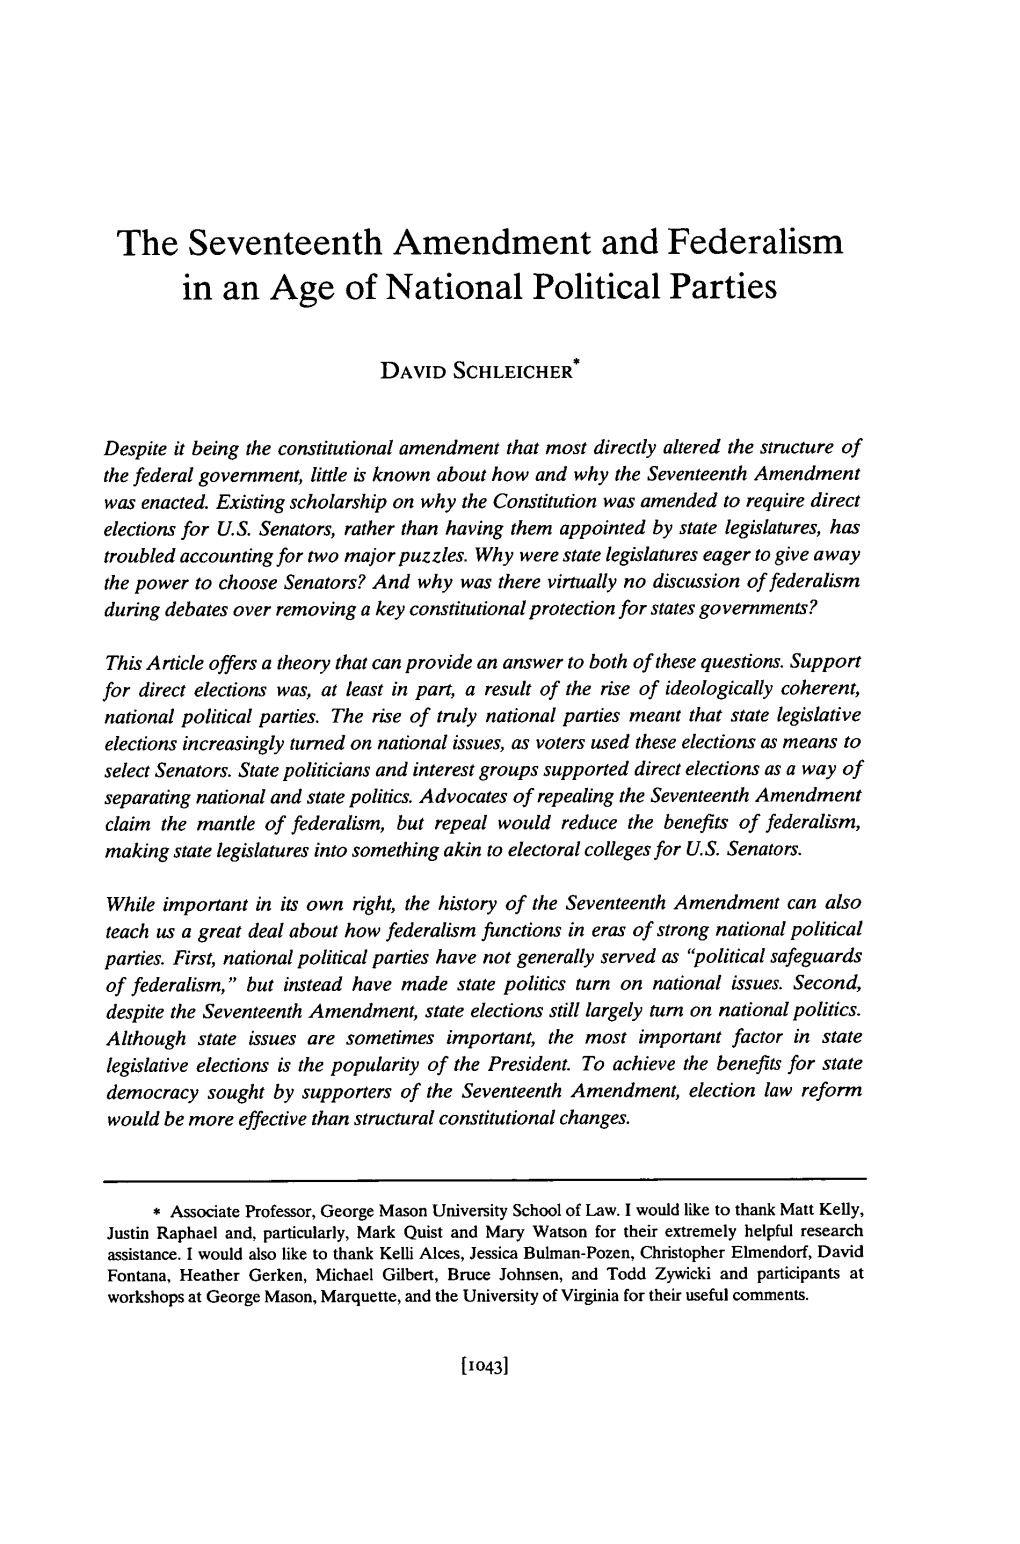 The Seventeenth Amendment and Federalism in an Age of National Political Parties